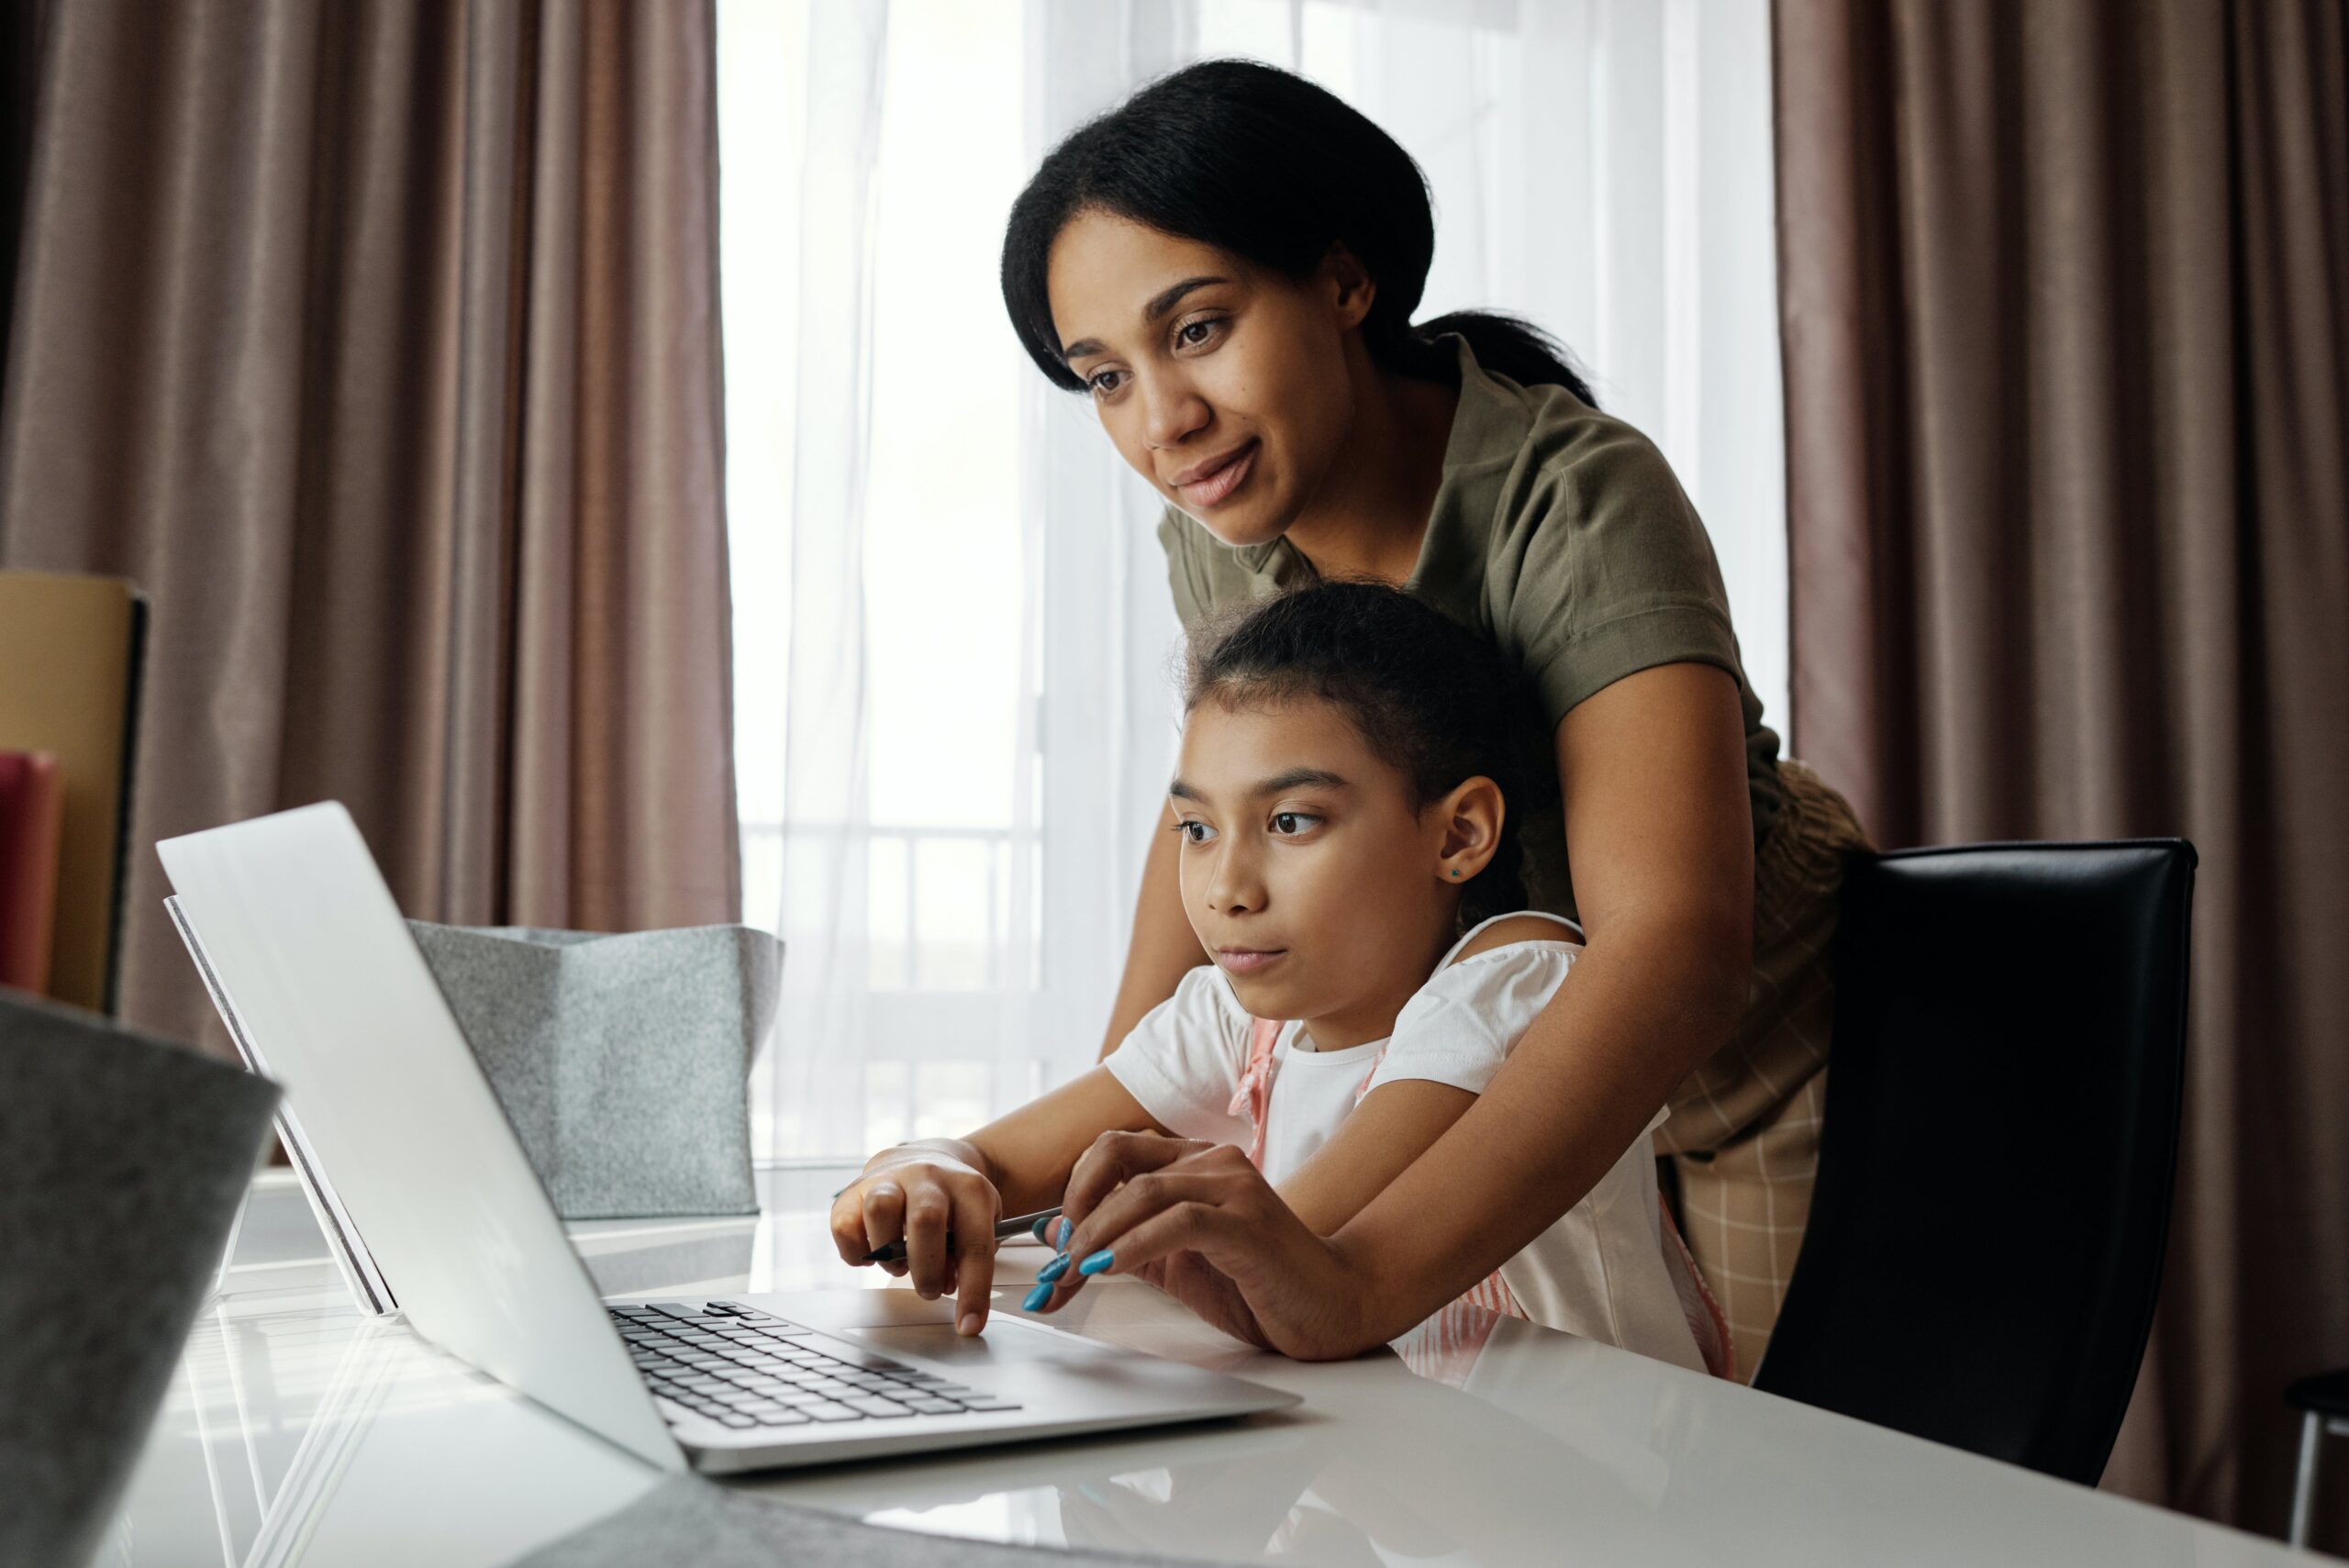 Woman using a laptop while holding her child